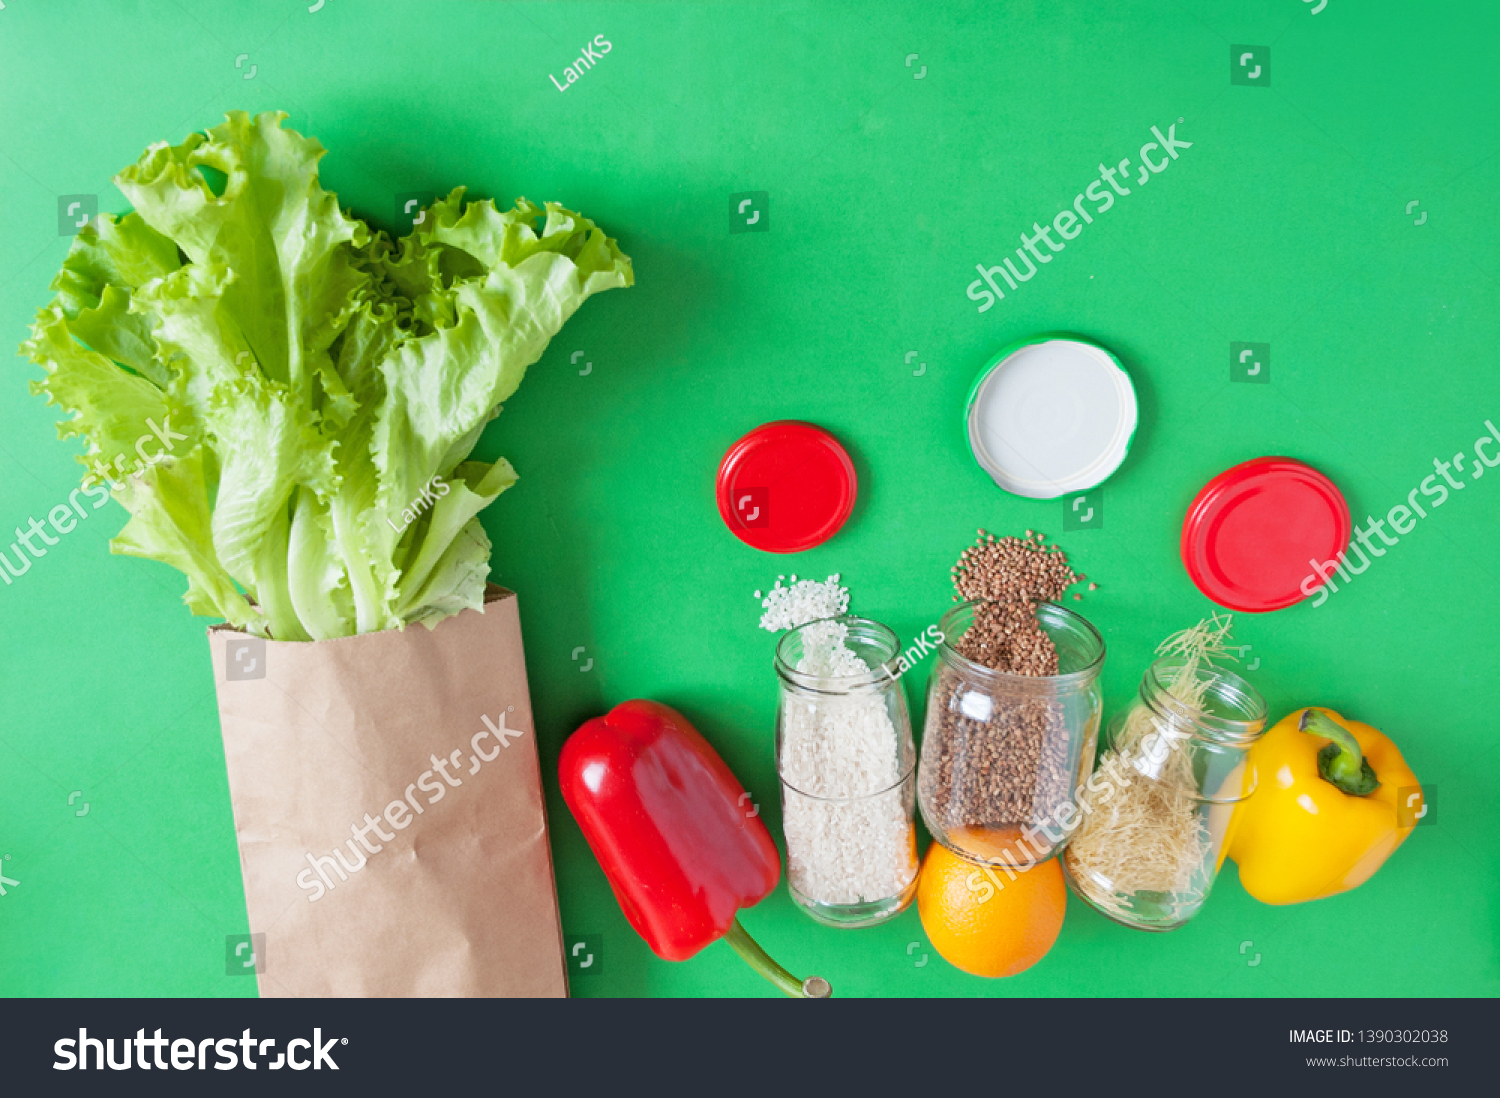 Download Fresh Lettuce Paper Bag Red Yellow Stock Photo Edit Now 1390302038 PSD Mockup Templates